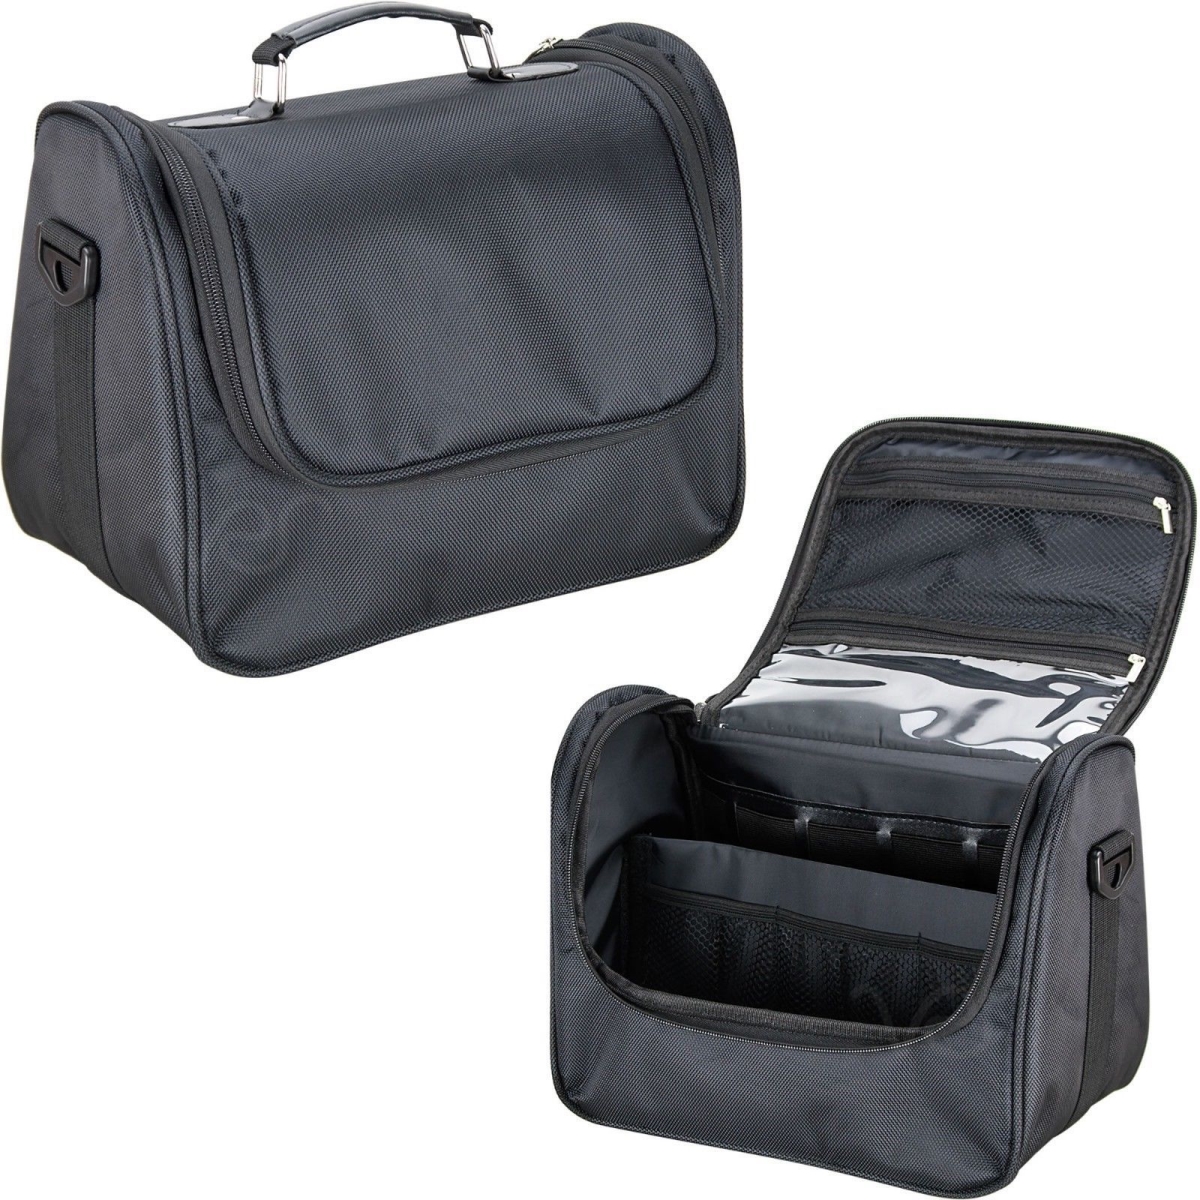 Hk3605nlab Black Soft Lightweight Makeup Case With Tools Accessories Travel Shoulder Strap - Nylon - 11.25 X 7 X 9.25 In.